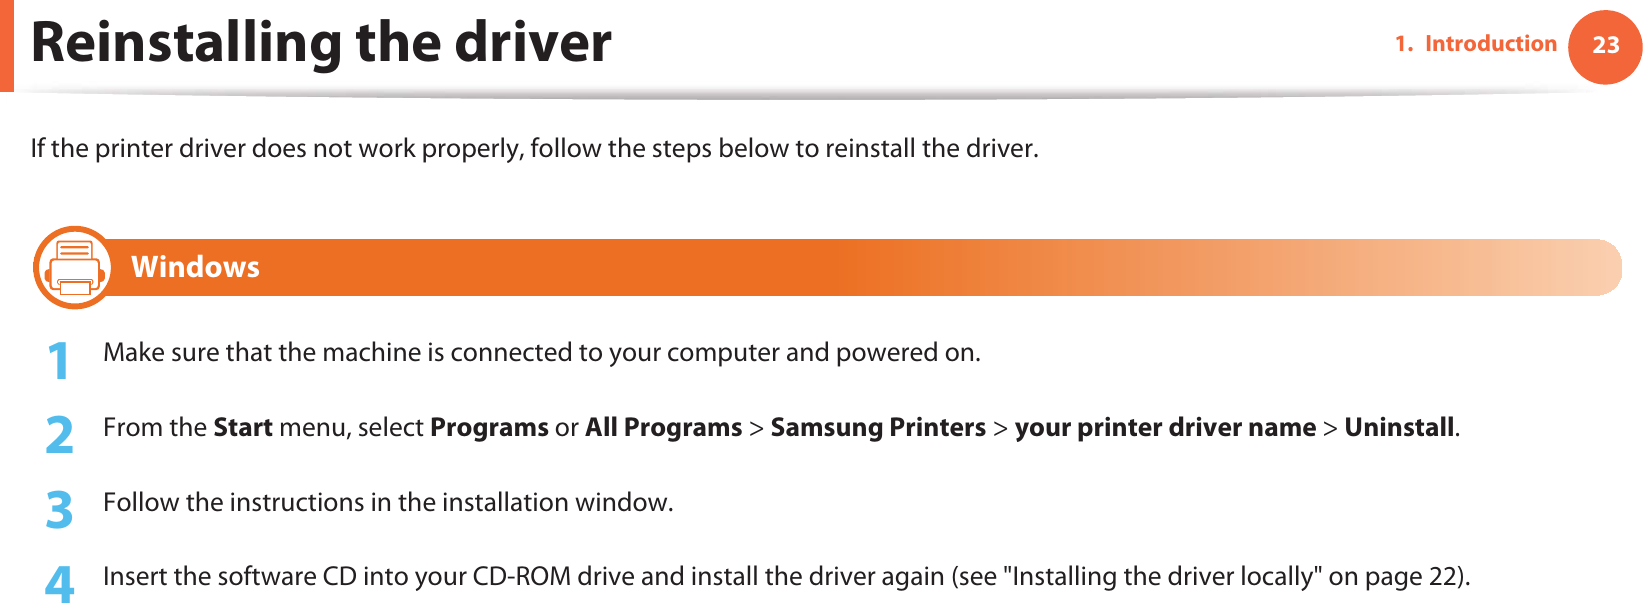 231. IntroductionReinstalling the driverIf the printer driver does not work properly, follow the steps below to reinstall the driver.14 Windows1Make sure that the machine is connected to your computer and powered on.2  From the Start menu, select Programs or All Programs &gt; Samsung Printers &gt; your printer driver name &gt; Uninstall.3  Follow the instructions in the installation window.4  Insert the software CD into your CD-ROM drive and install the driver again (see &quot;Installing the driver locally&quot; on page 22).